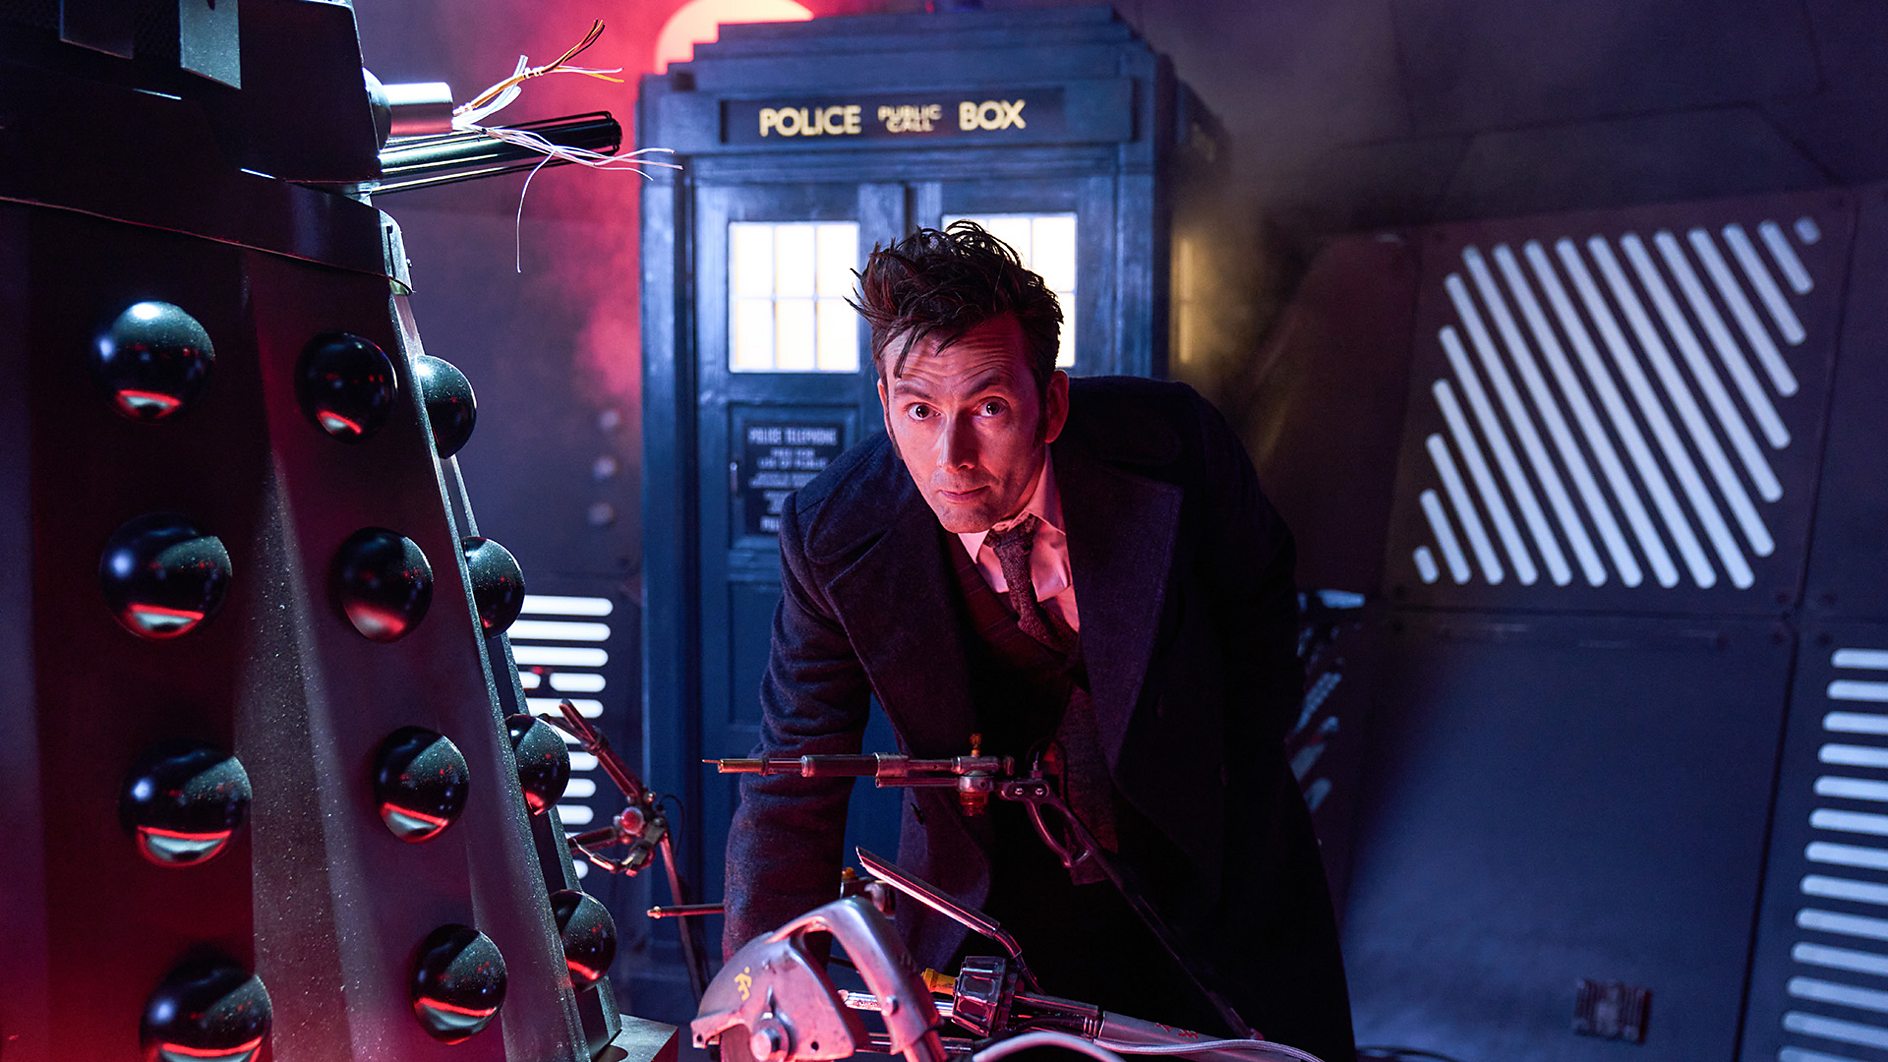 Doctor Who: The TARDIS lands during BBC Children In Need